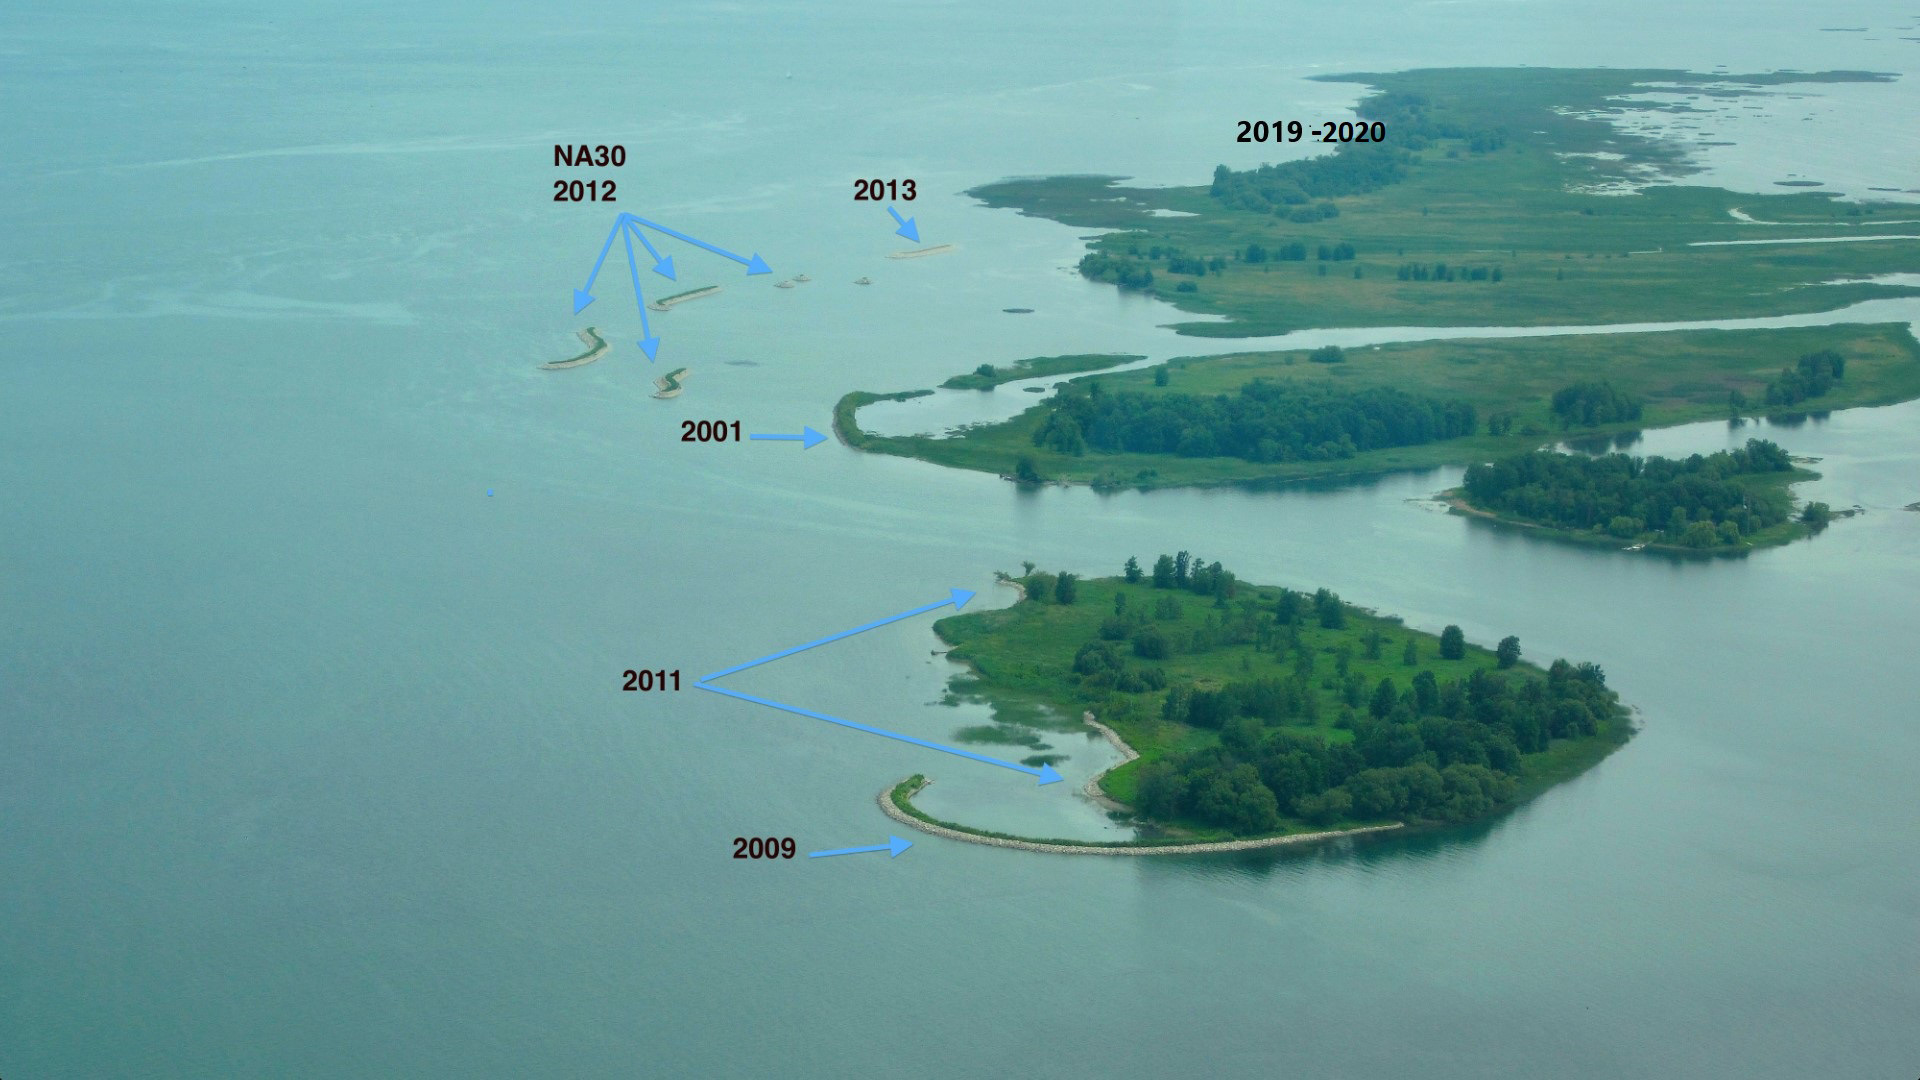 Date of development works for the protection of the Iles-de-la-Paix